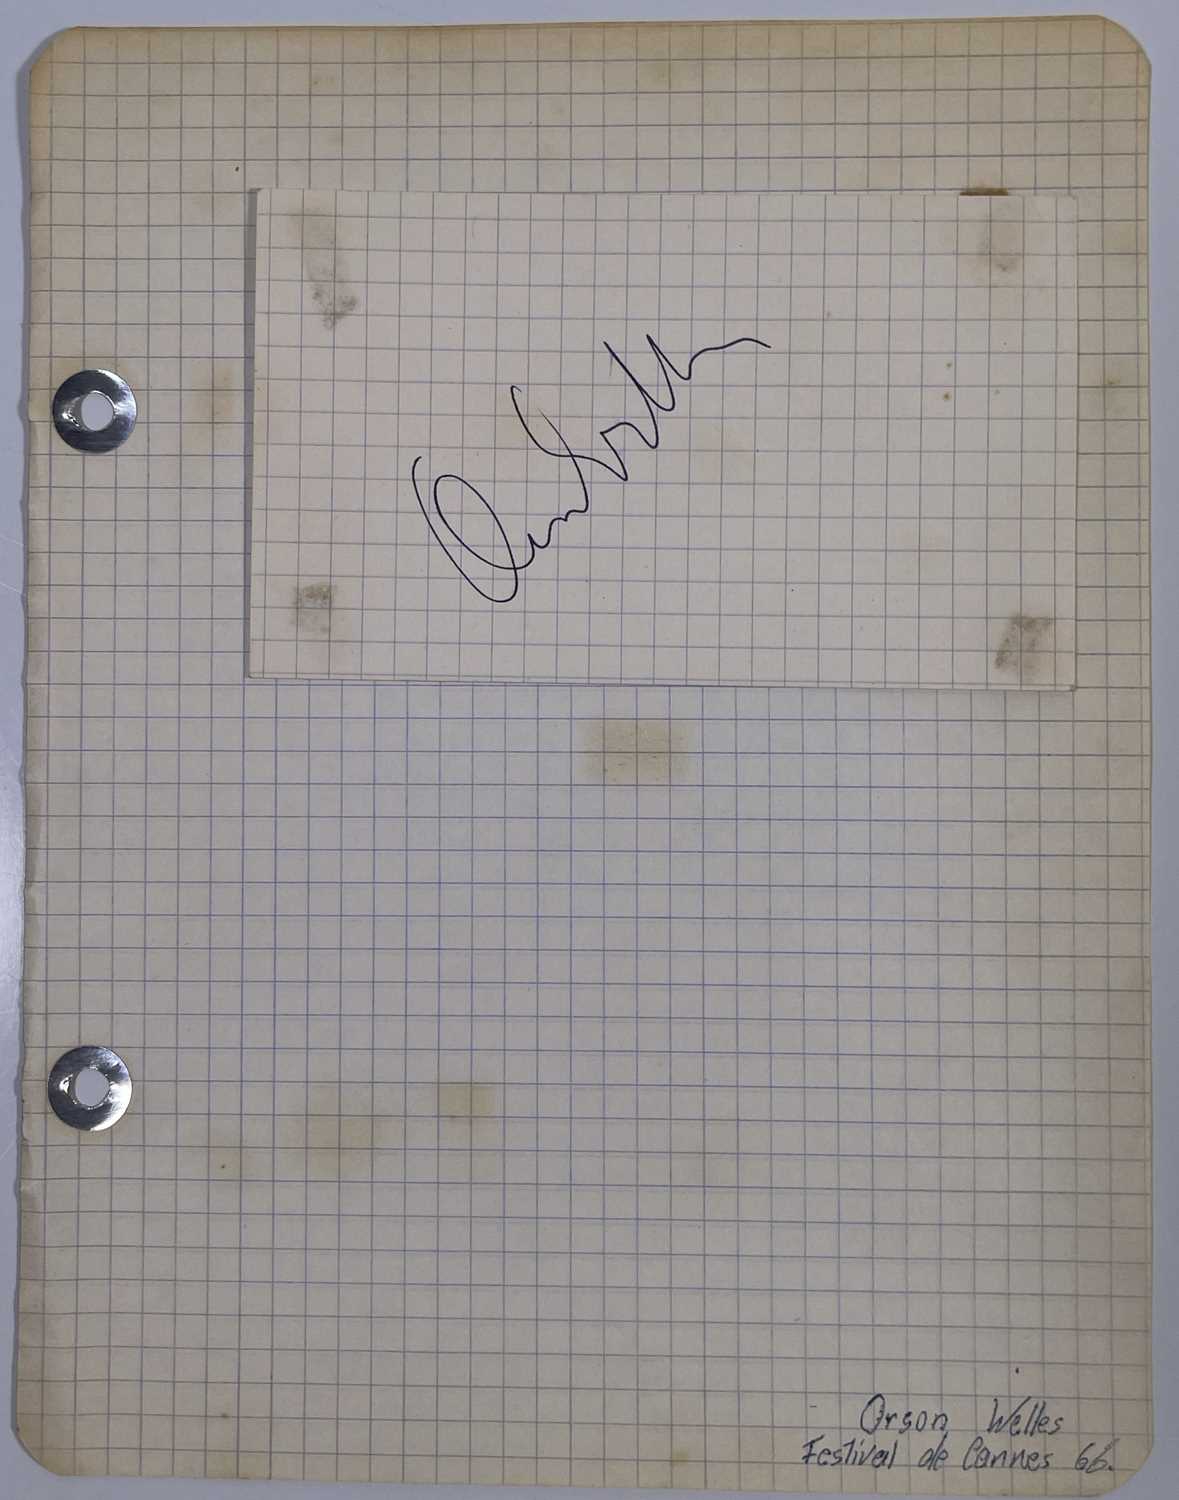 ORSON WELLES - SIGNED CUTTING.